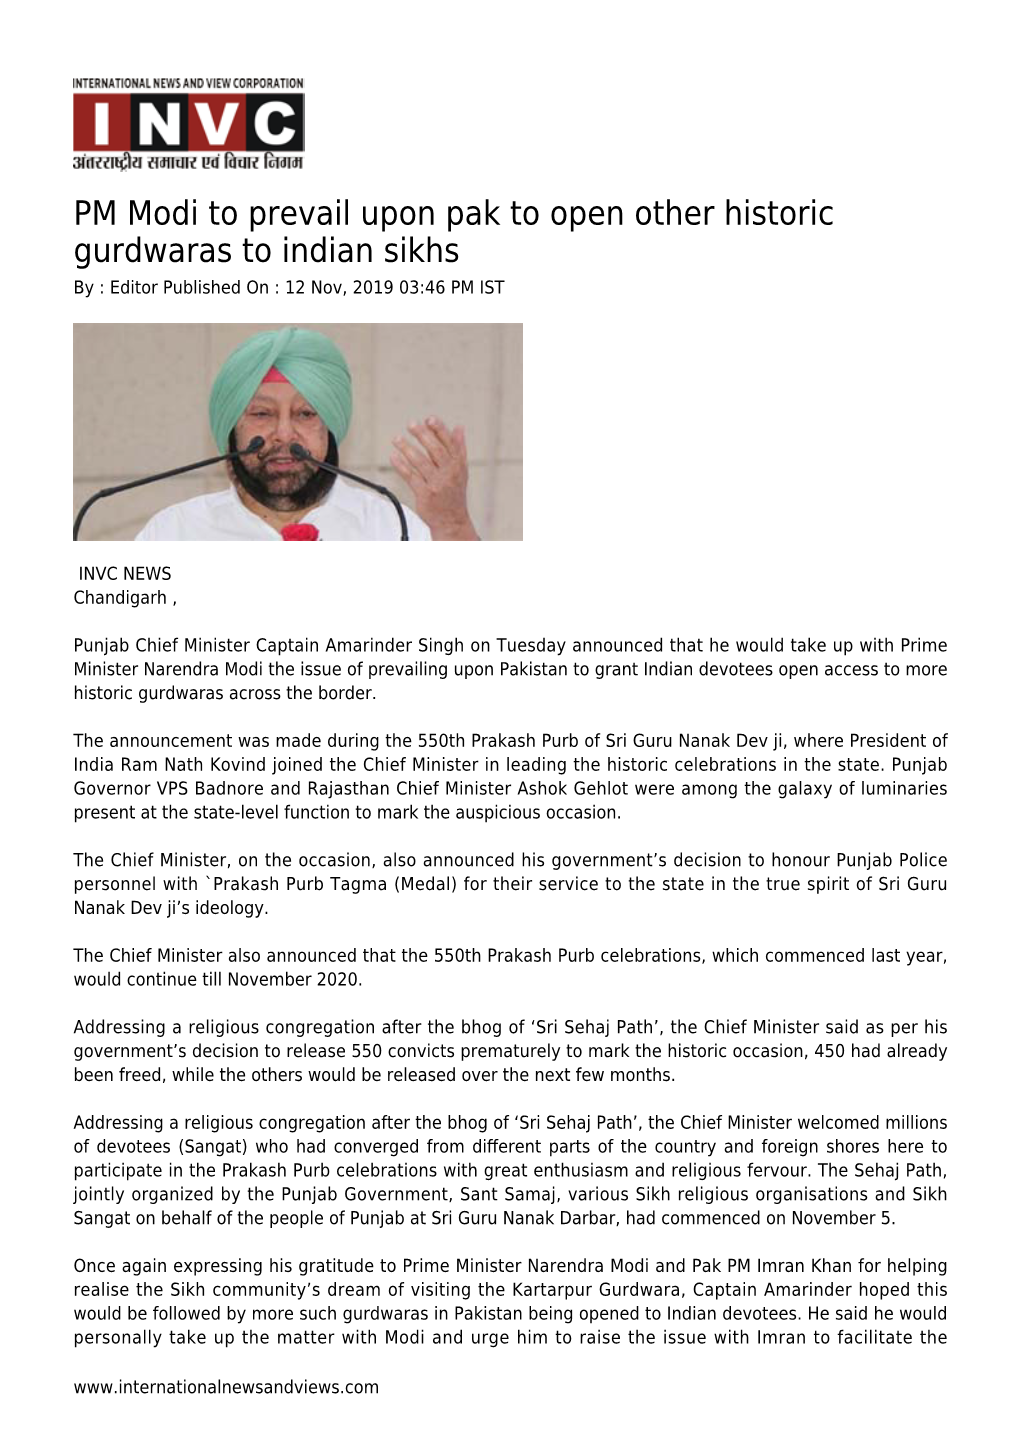 PM Modi to Prevail Upon Pak to Open Other Historic Gurdwaras to Indian Sikhs by : Editor Published on : 12 Nov, 2019 03:46 PM IST